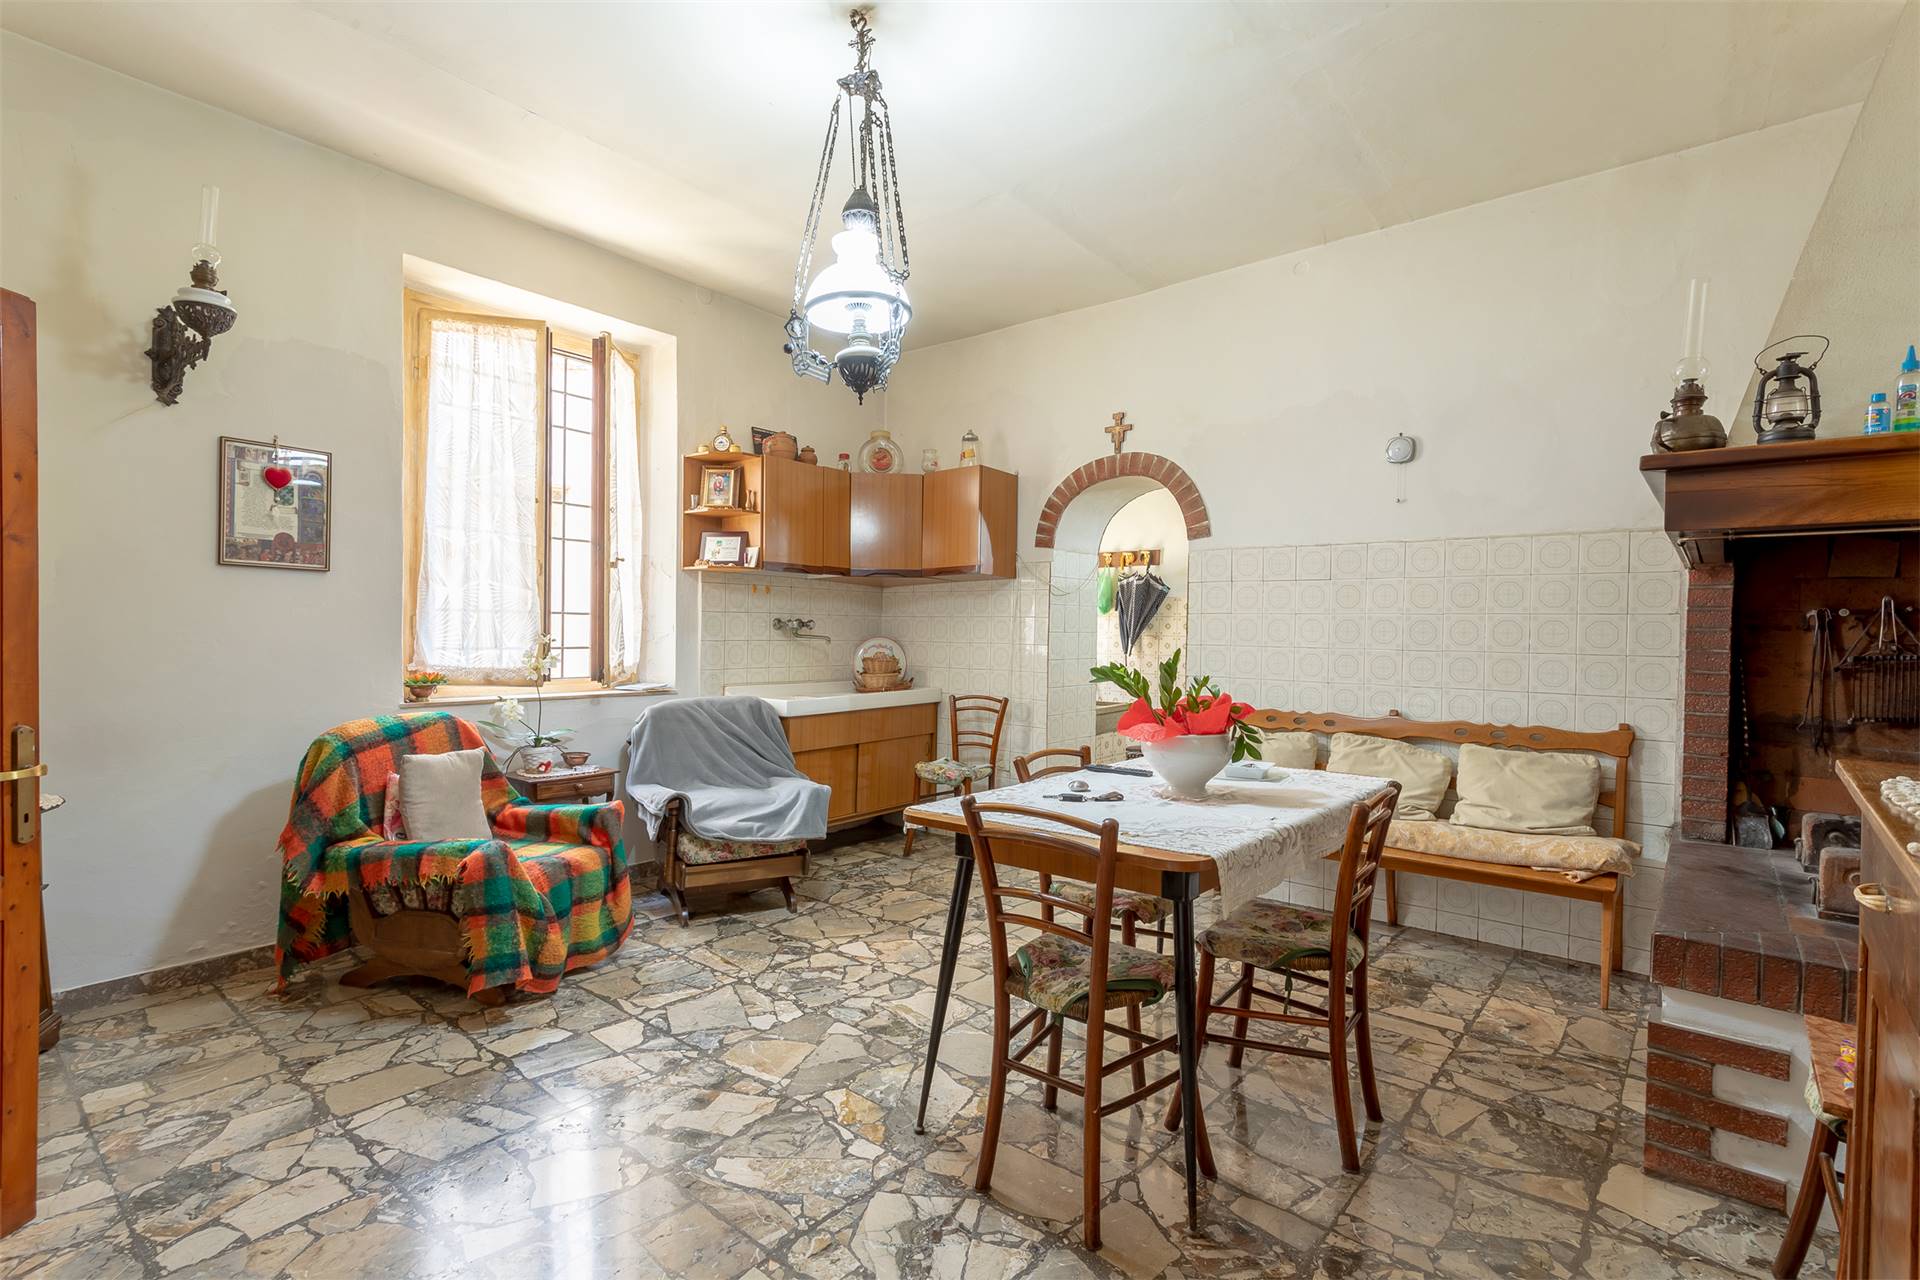 SANT'ANGELO A LECORE, CAMPI BISENZIO, Terraced house for sale of 135 Sq. mt., Be restored, Heating Non-existent, Energetic class: G, placed at Ground 